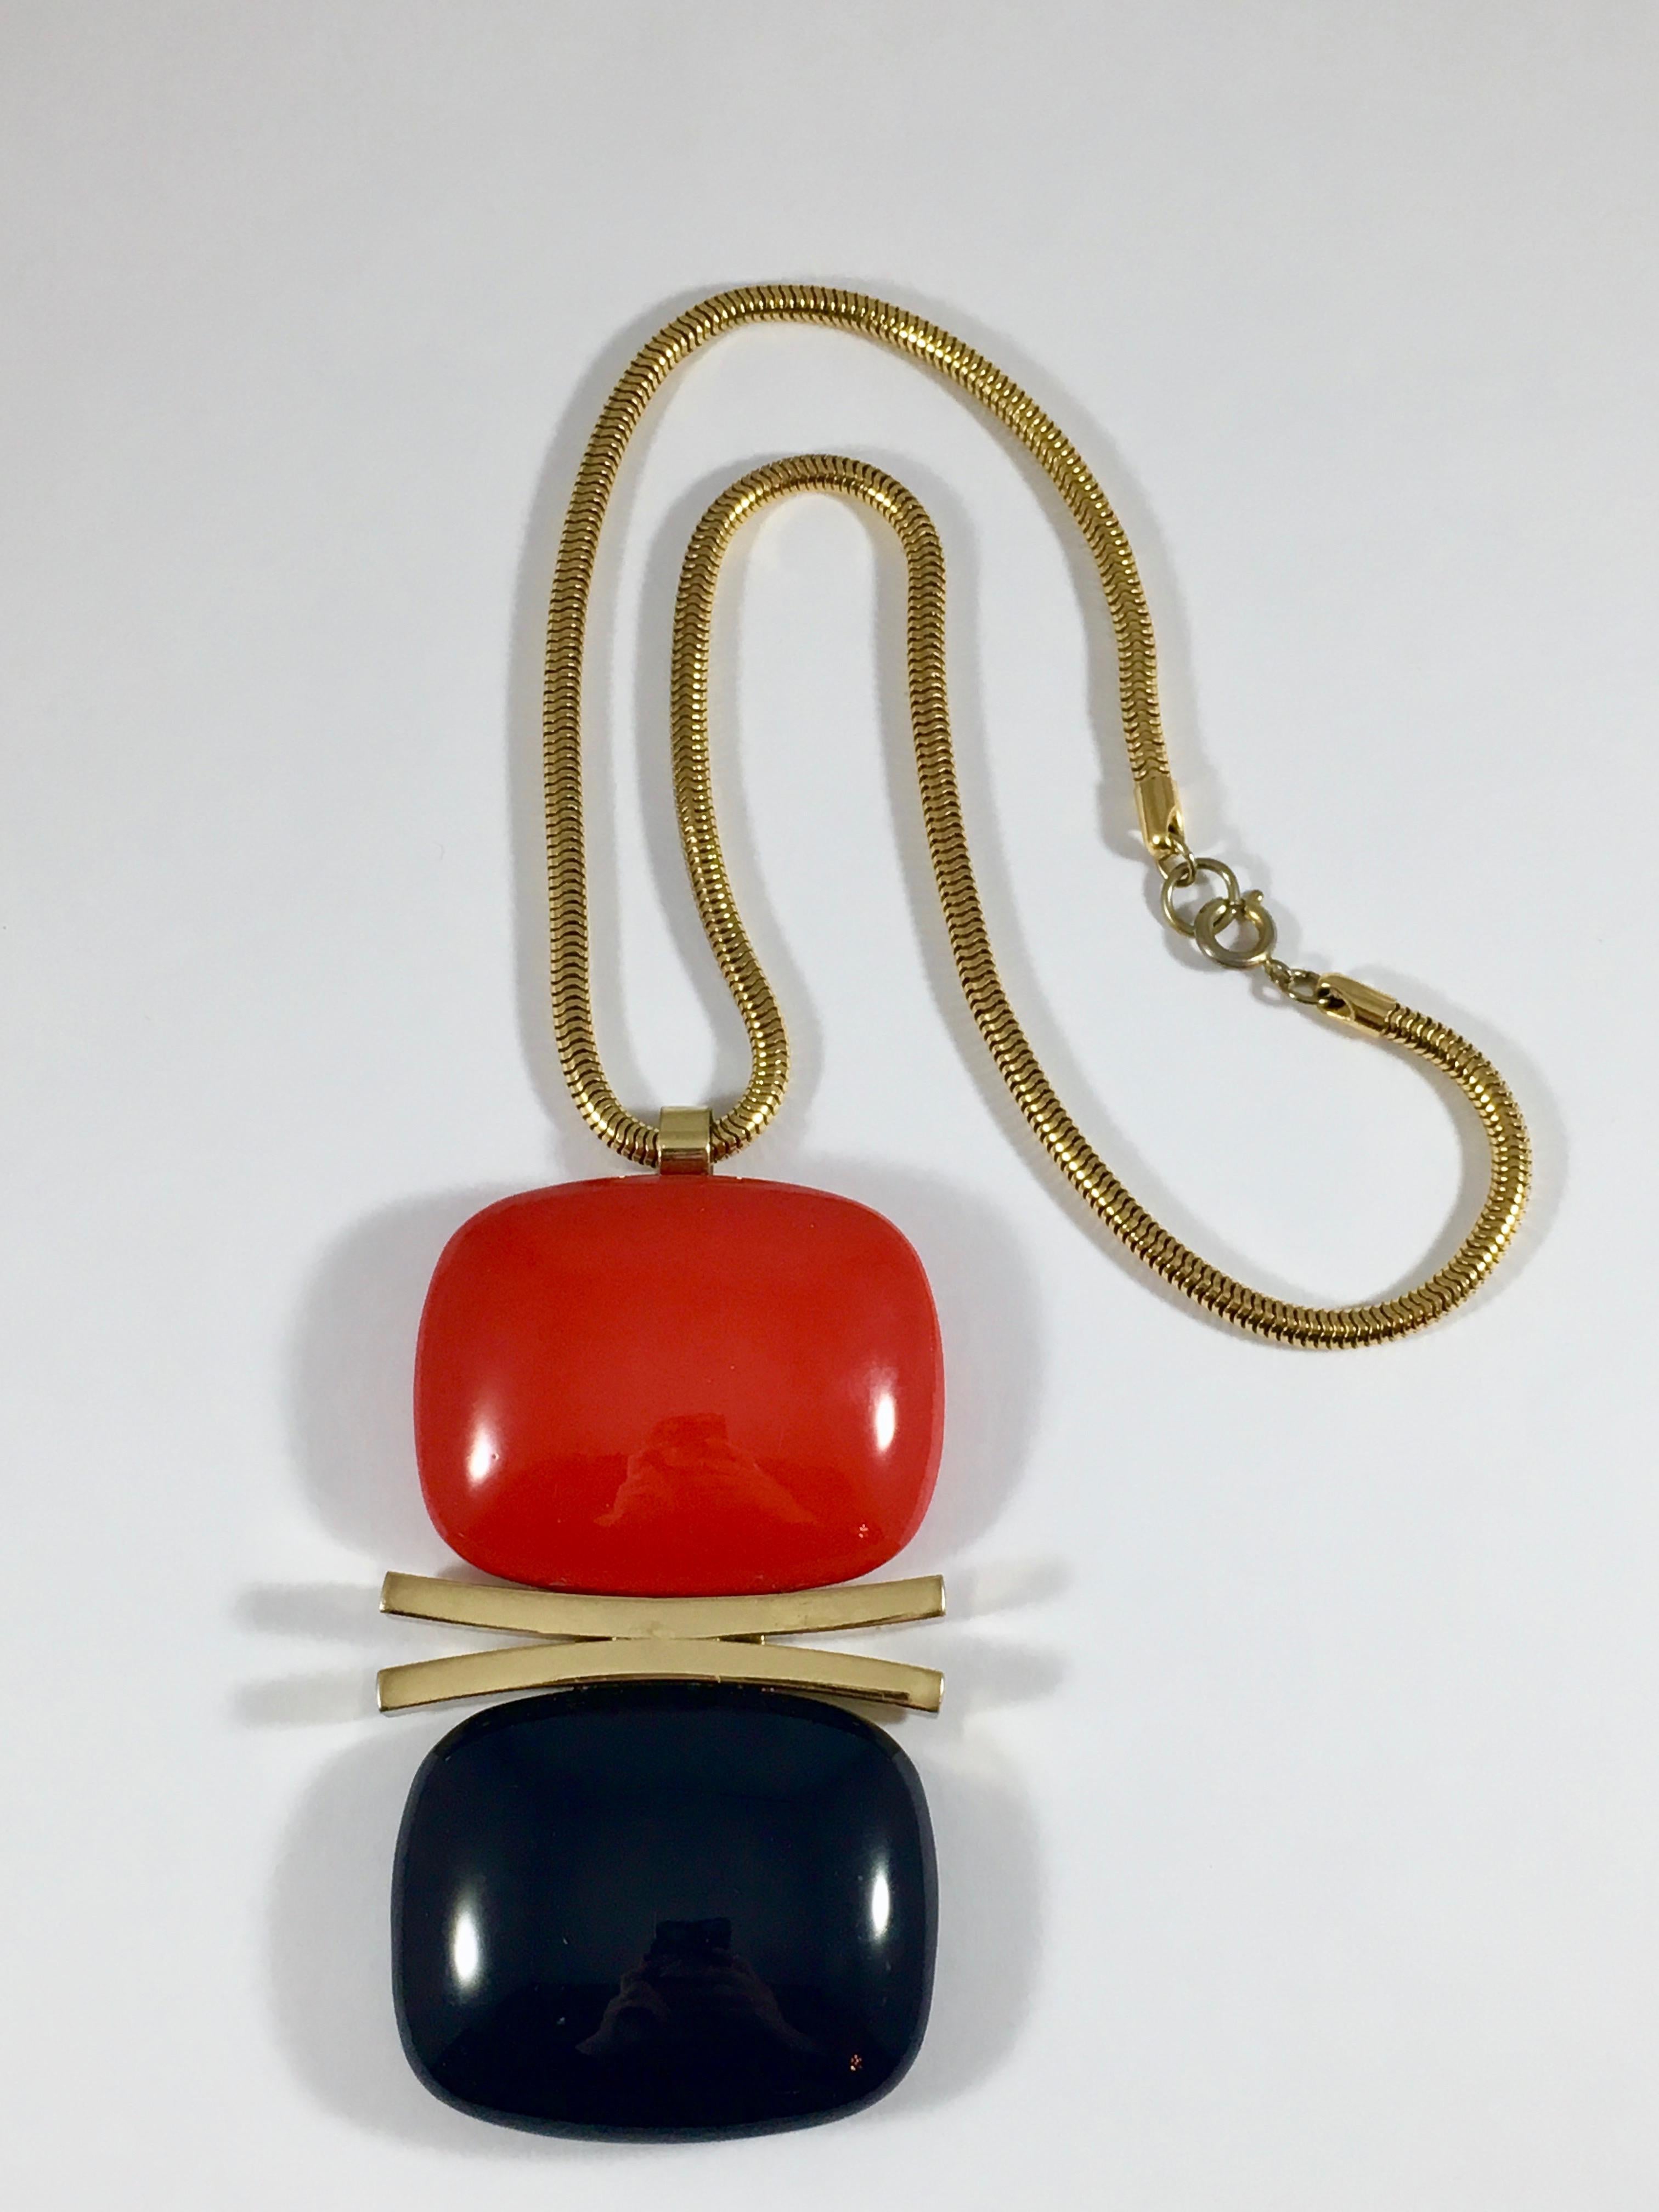 Women's Lanvin Red and Navy Modernist Pendant Necklace, 1970s For Sale